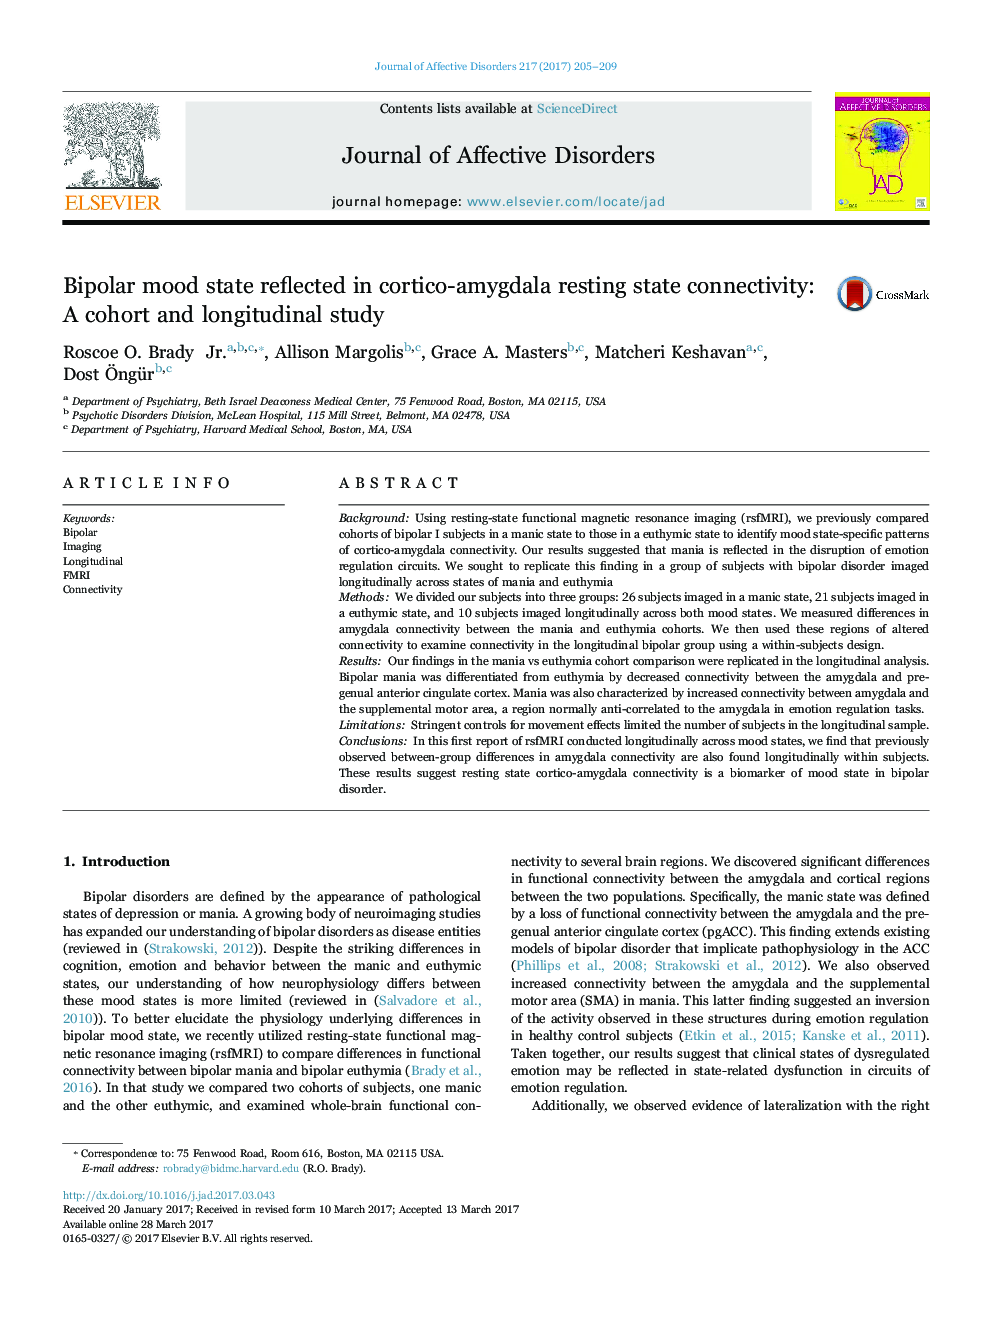 Bipolar mood state reflected in cortico-amygdala resting state connectivity: A cohort and longitudinal study